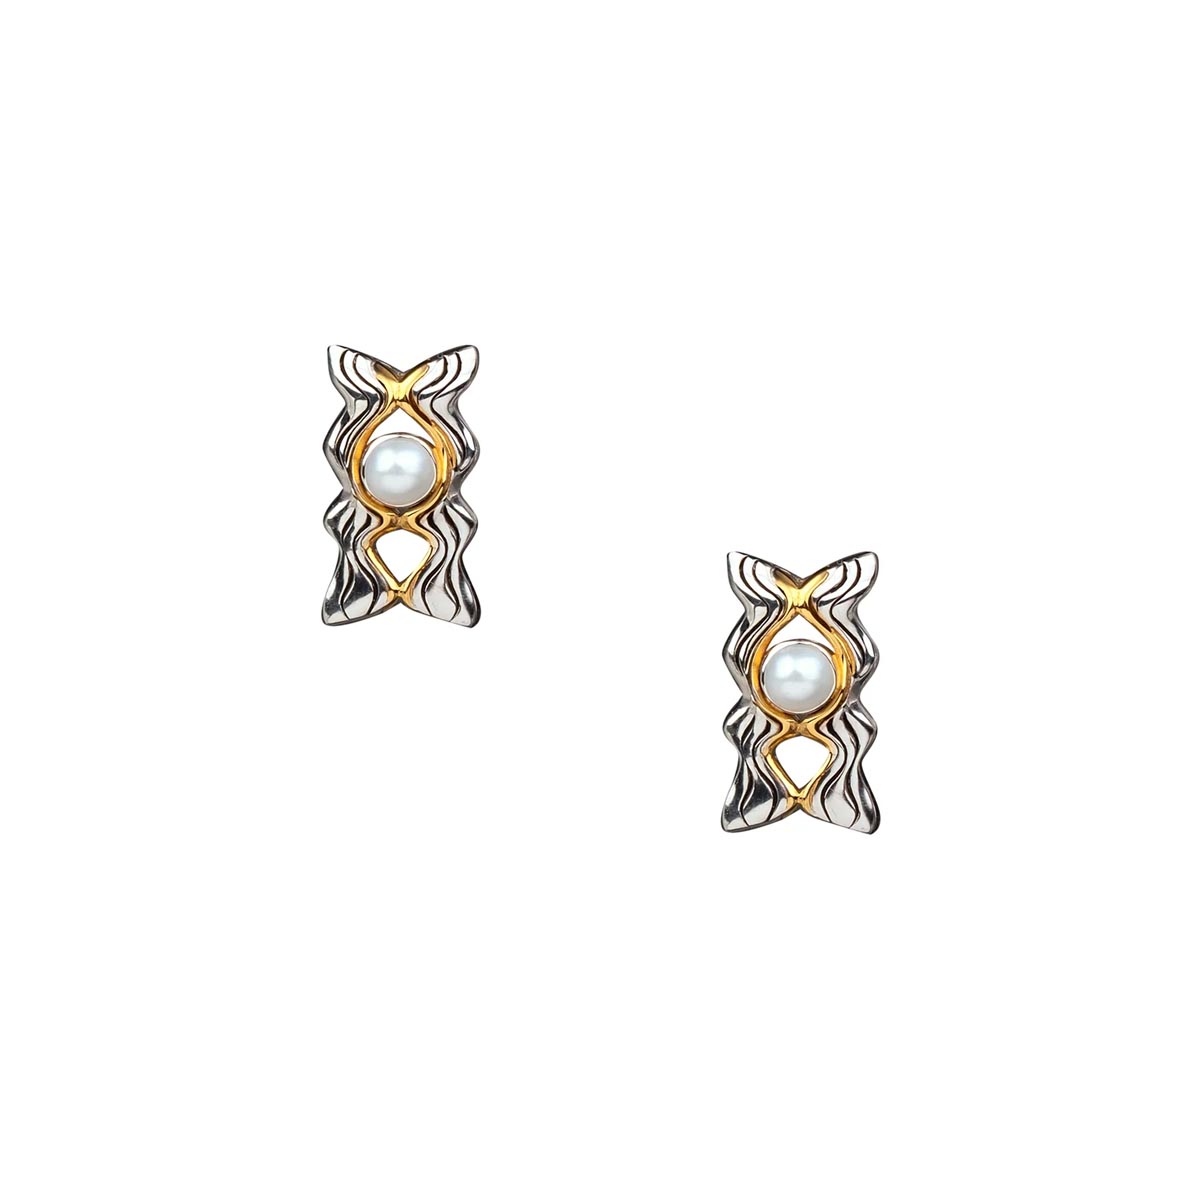 Keith Jack Rocks n Rivers Cultured Freshwater Pearl Stud Earrings in Sterling Silver and 10kt Yellow Gold (3.5mm pearls)